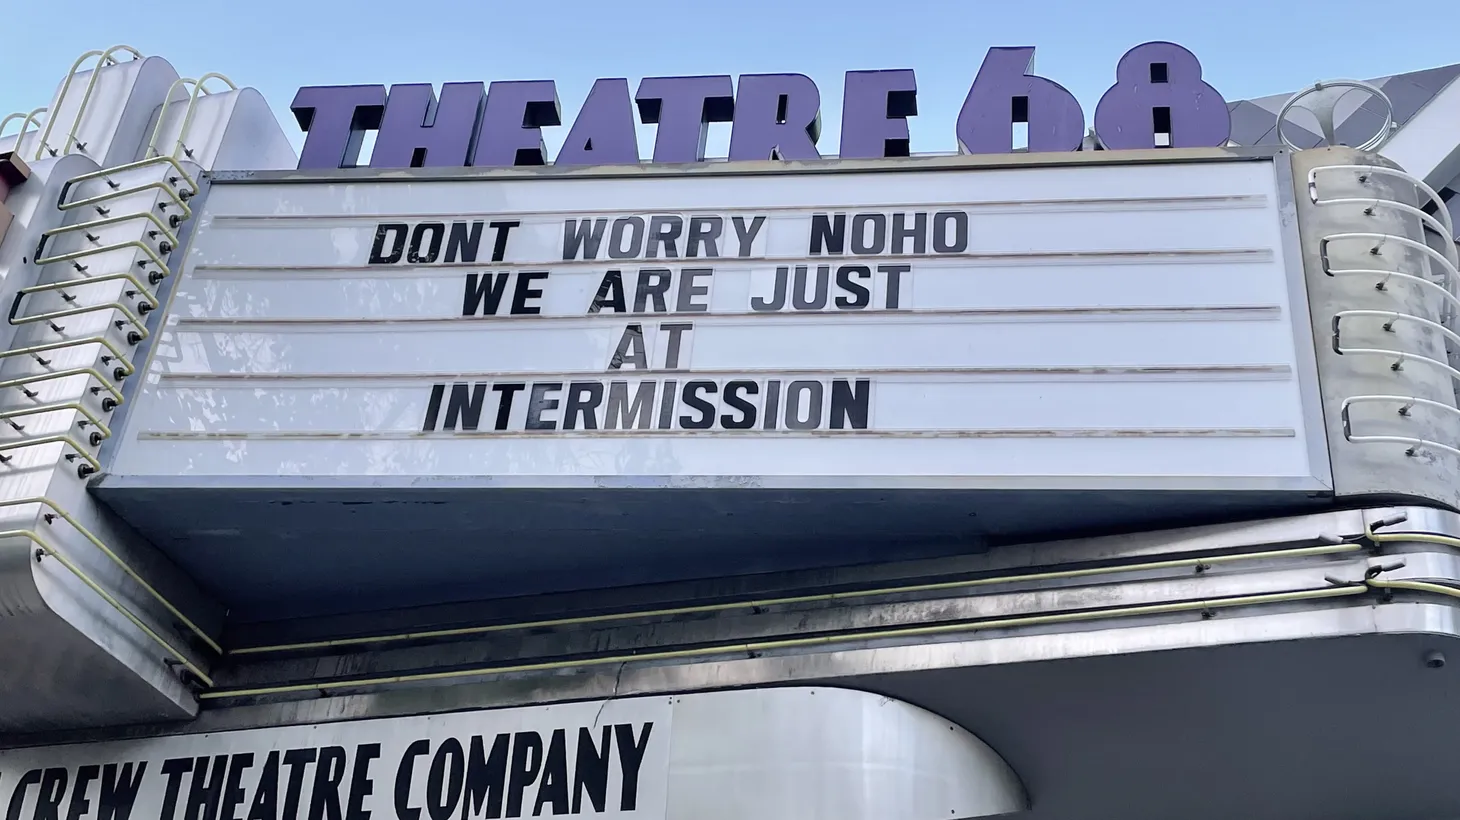 Small theater venues like Theater 68 in the North Hollywood Arts District were hit hard by the pandemic shutdown. Many venues remain closed.